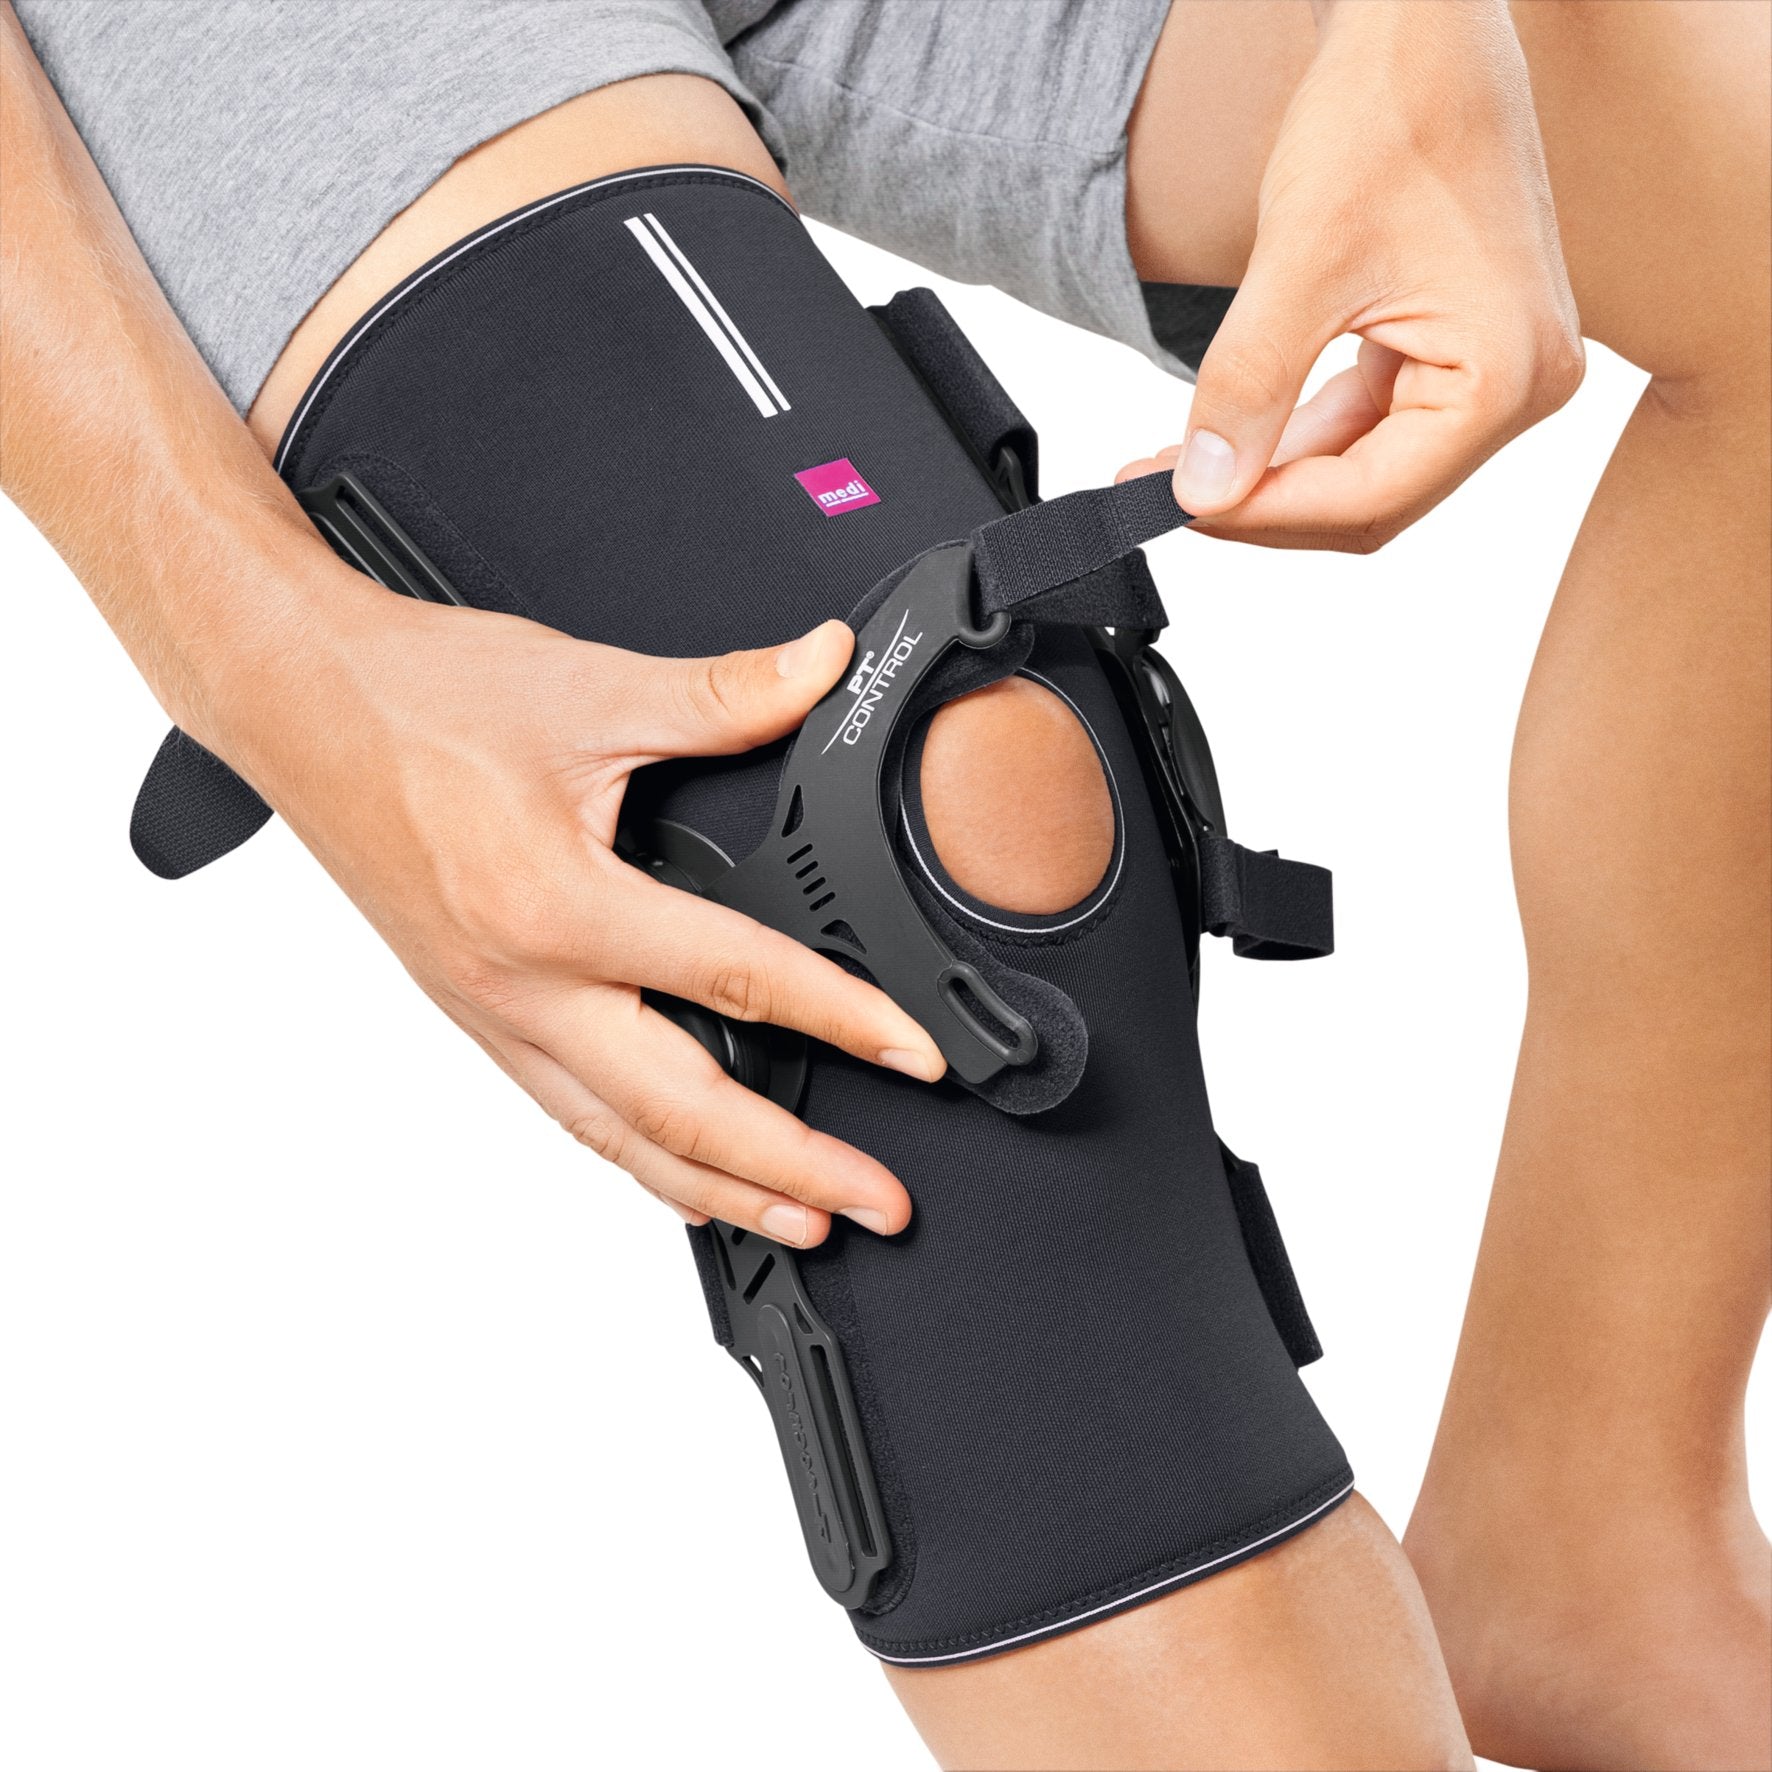 Thermoskin Hinged Knee Wrap Flexion/Extension – Doc Ortho